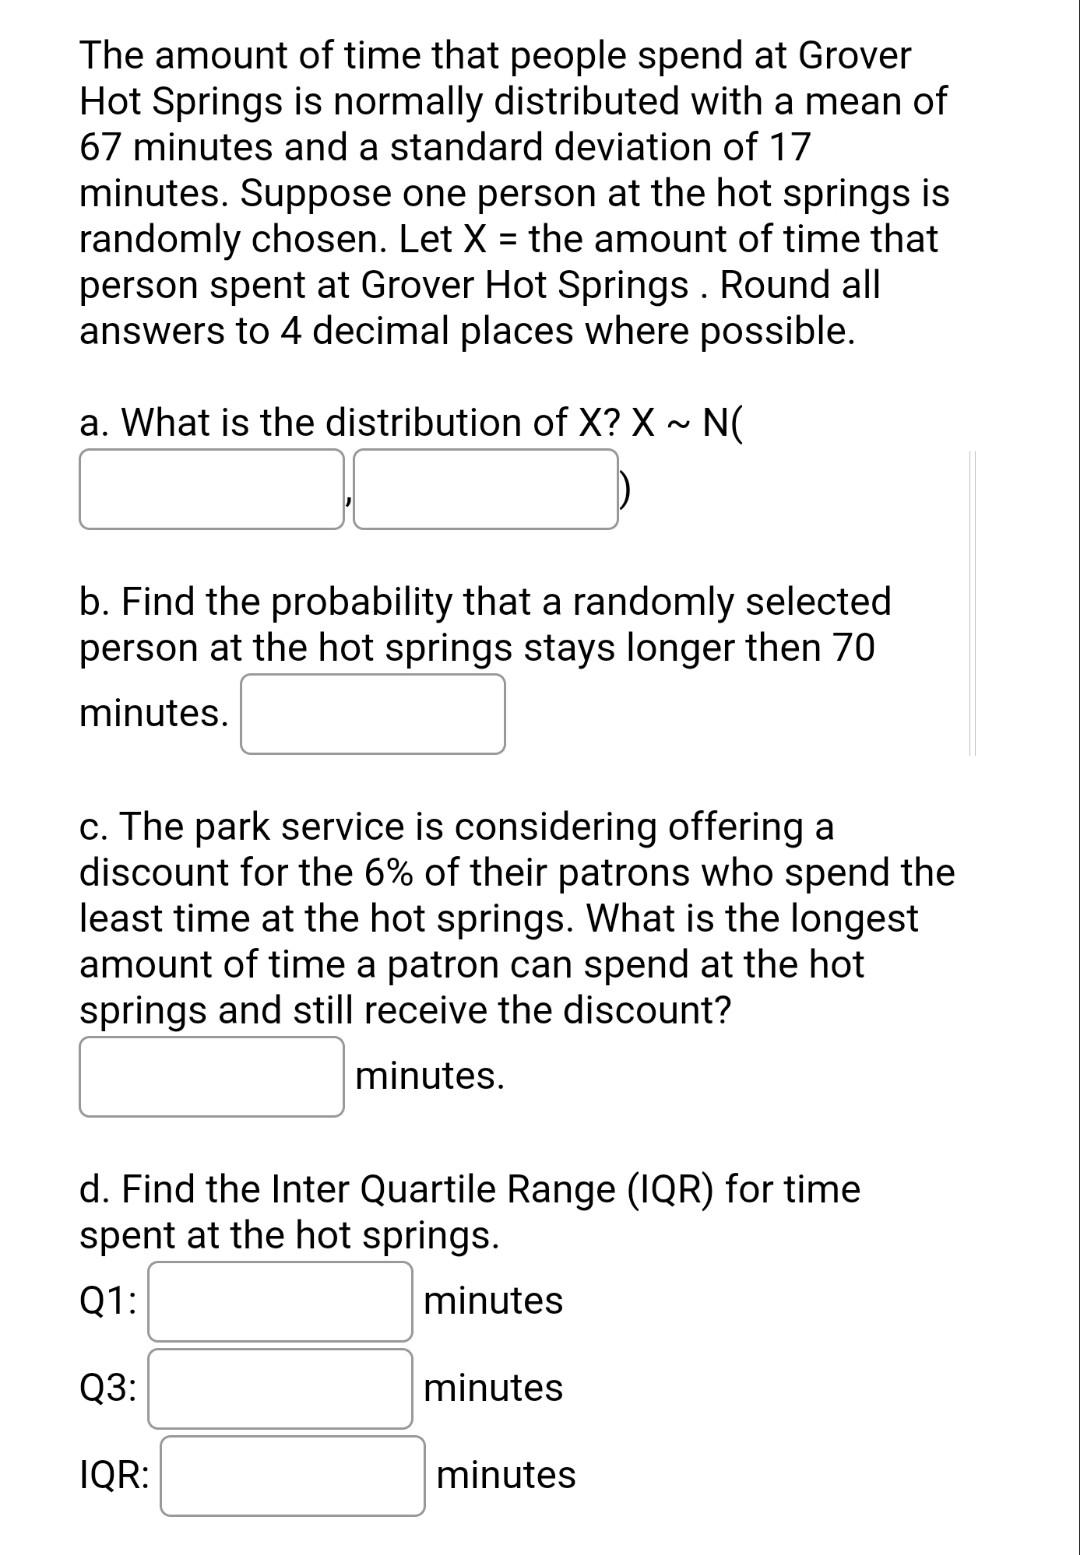 The Amount Of Time That People Spend At Grover Hot Springs Is Normally Distributed With A Mean Of 67 Minutes And A Stand 1